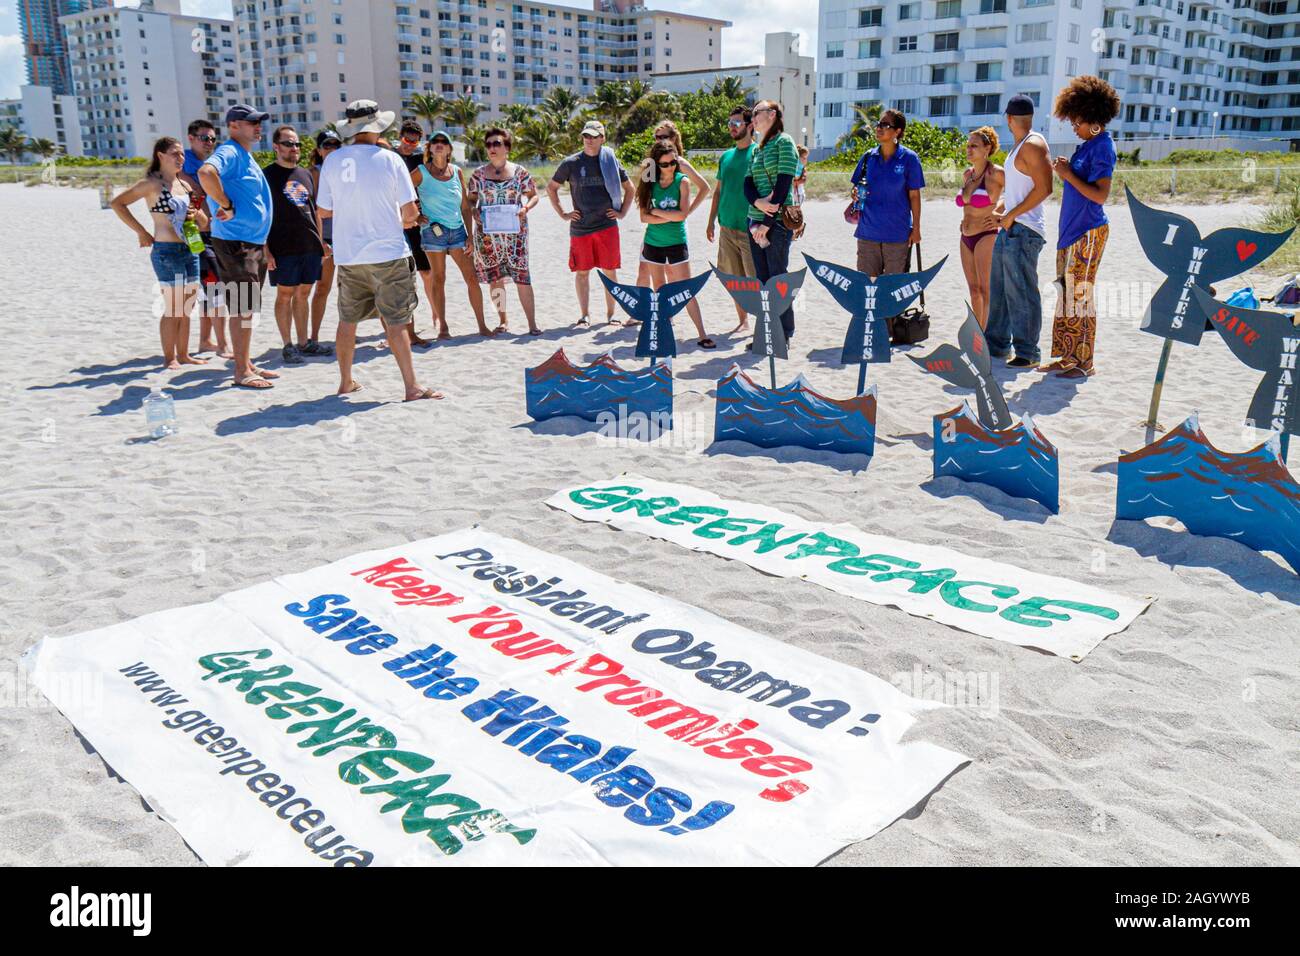 Miami Beach Florida,Greenpeace,manifestation,protestation,Save the Whales,organisateur,organisation,bannière,groupe,supporters,FL100526025 Banque D'Images